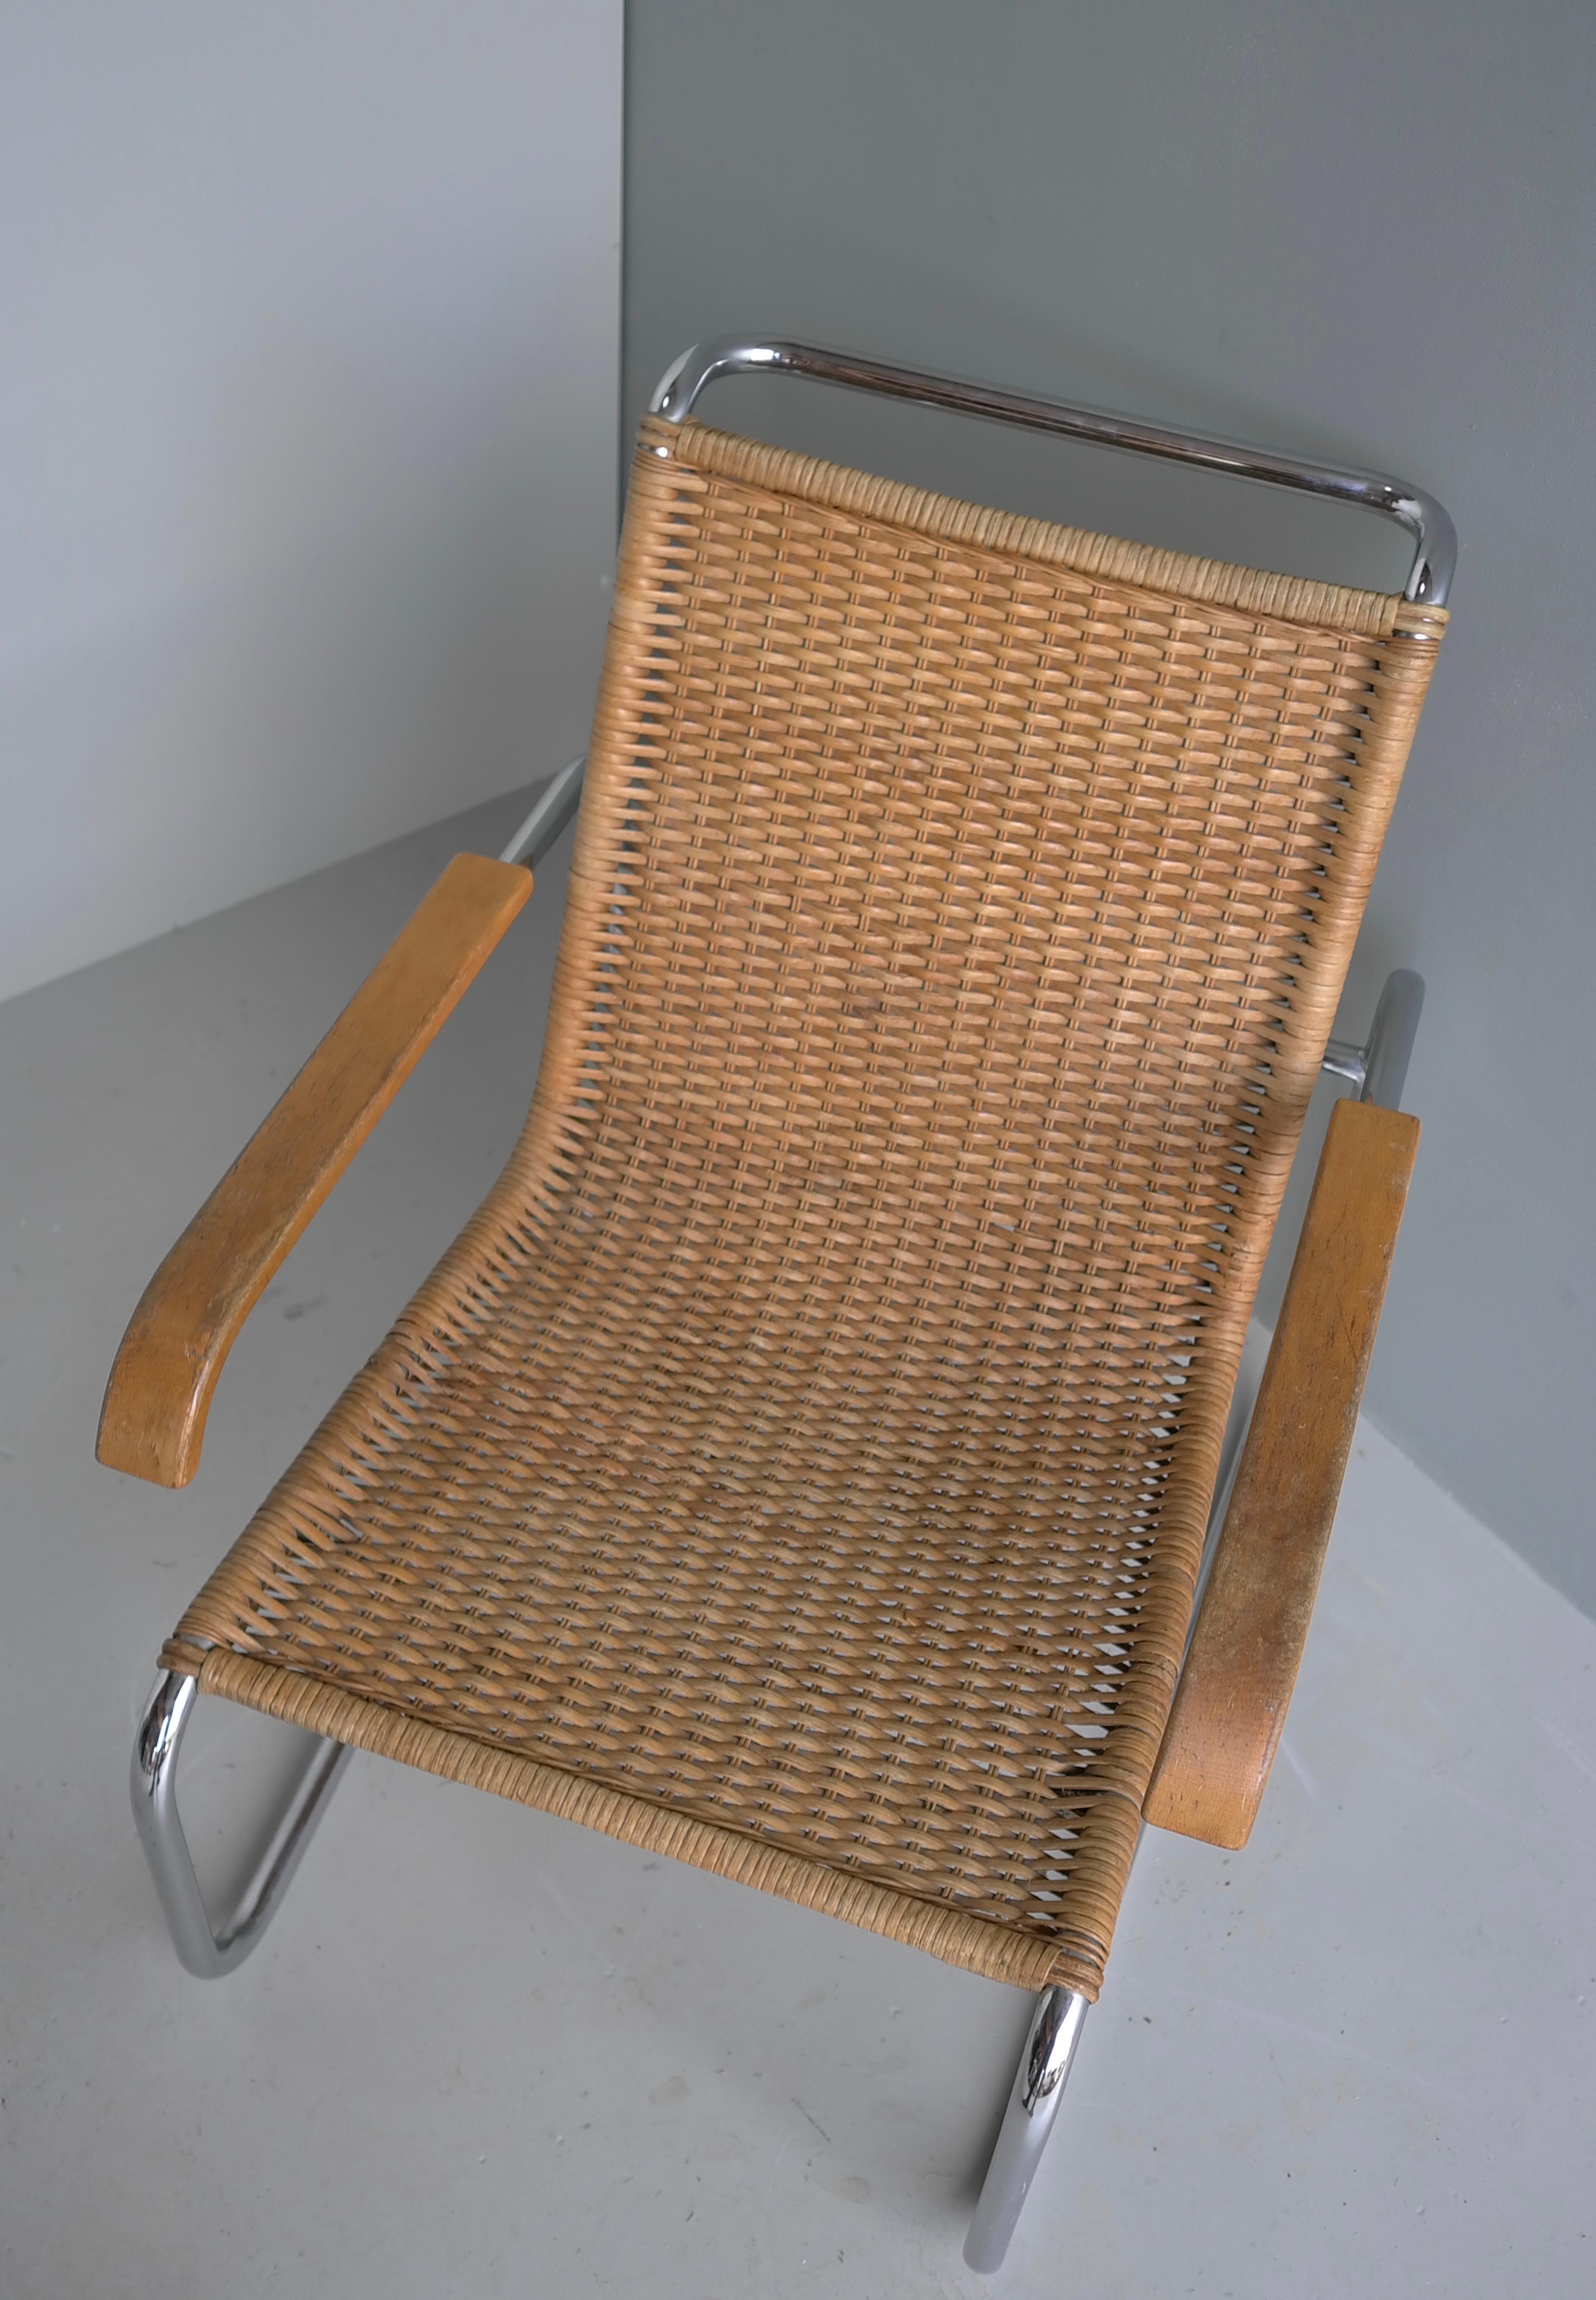 Marcel Breuer B35 Wicker and Chrome Armchair by Thonet 1960's For Sale 2